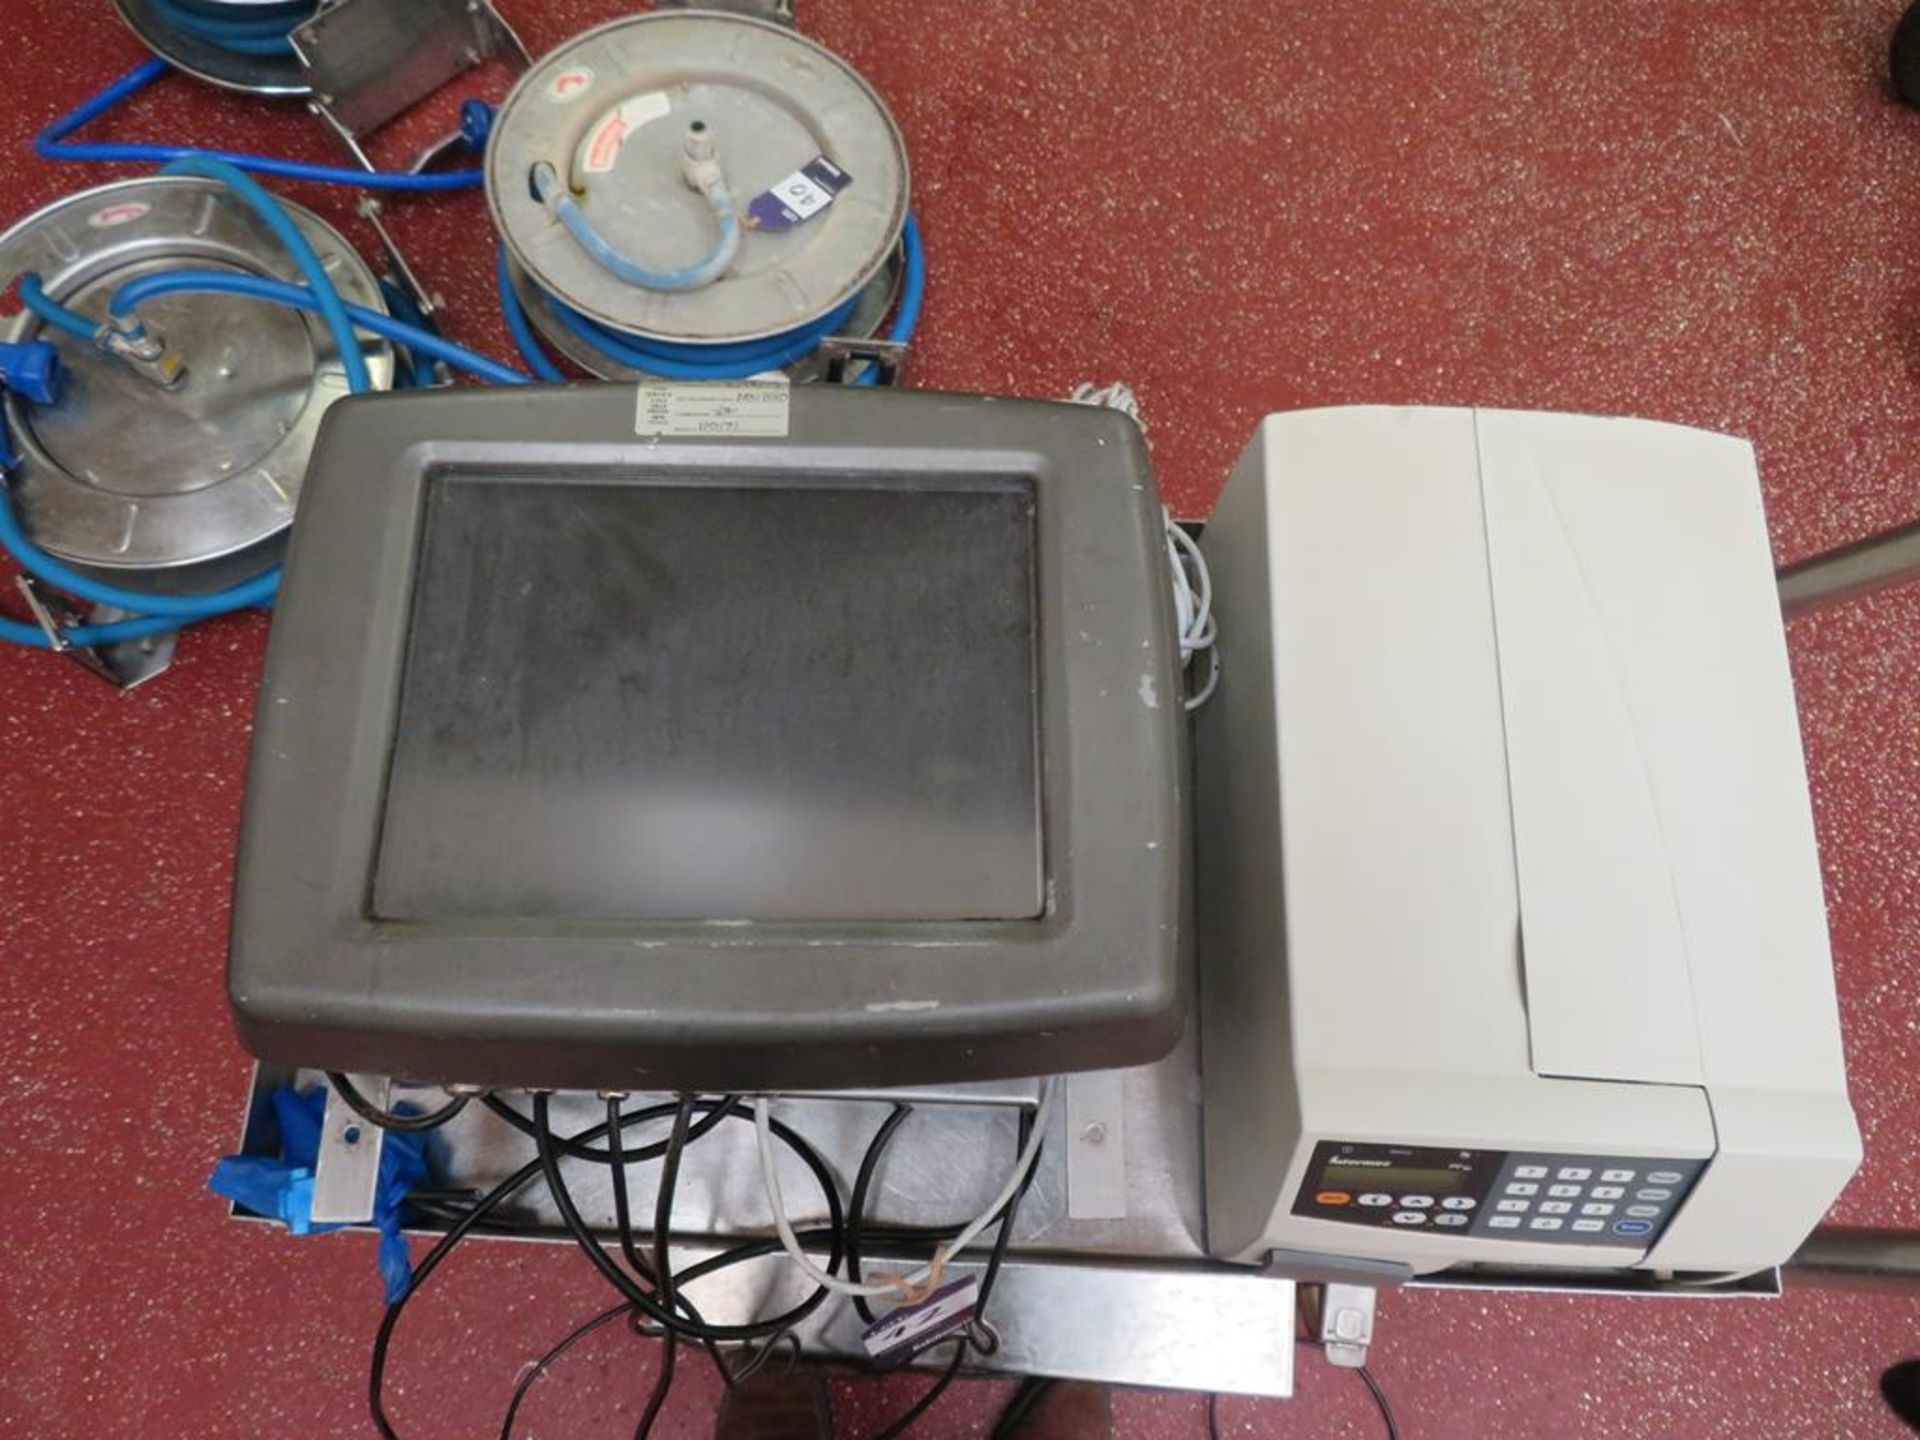 2 x Stainless Steel Weighing Platforms, Stevens DRP3000i Digital Read Out etc - Image 2 of 7